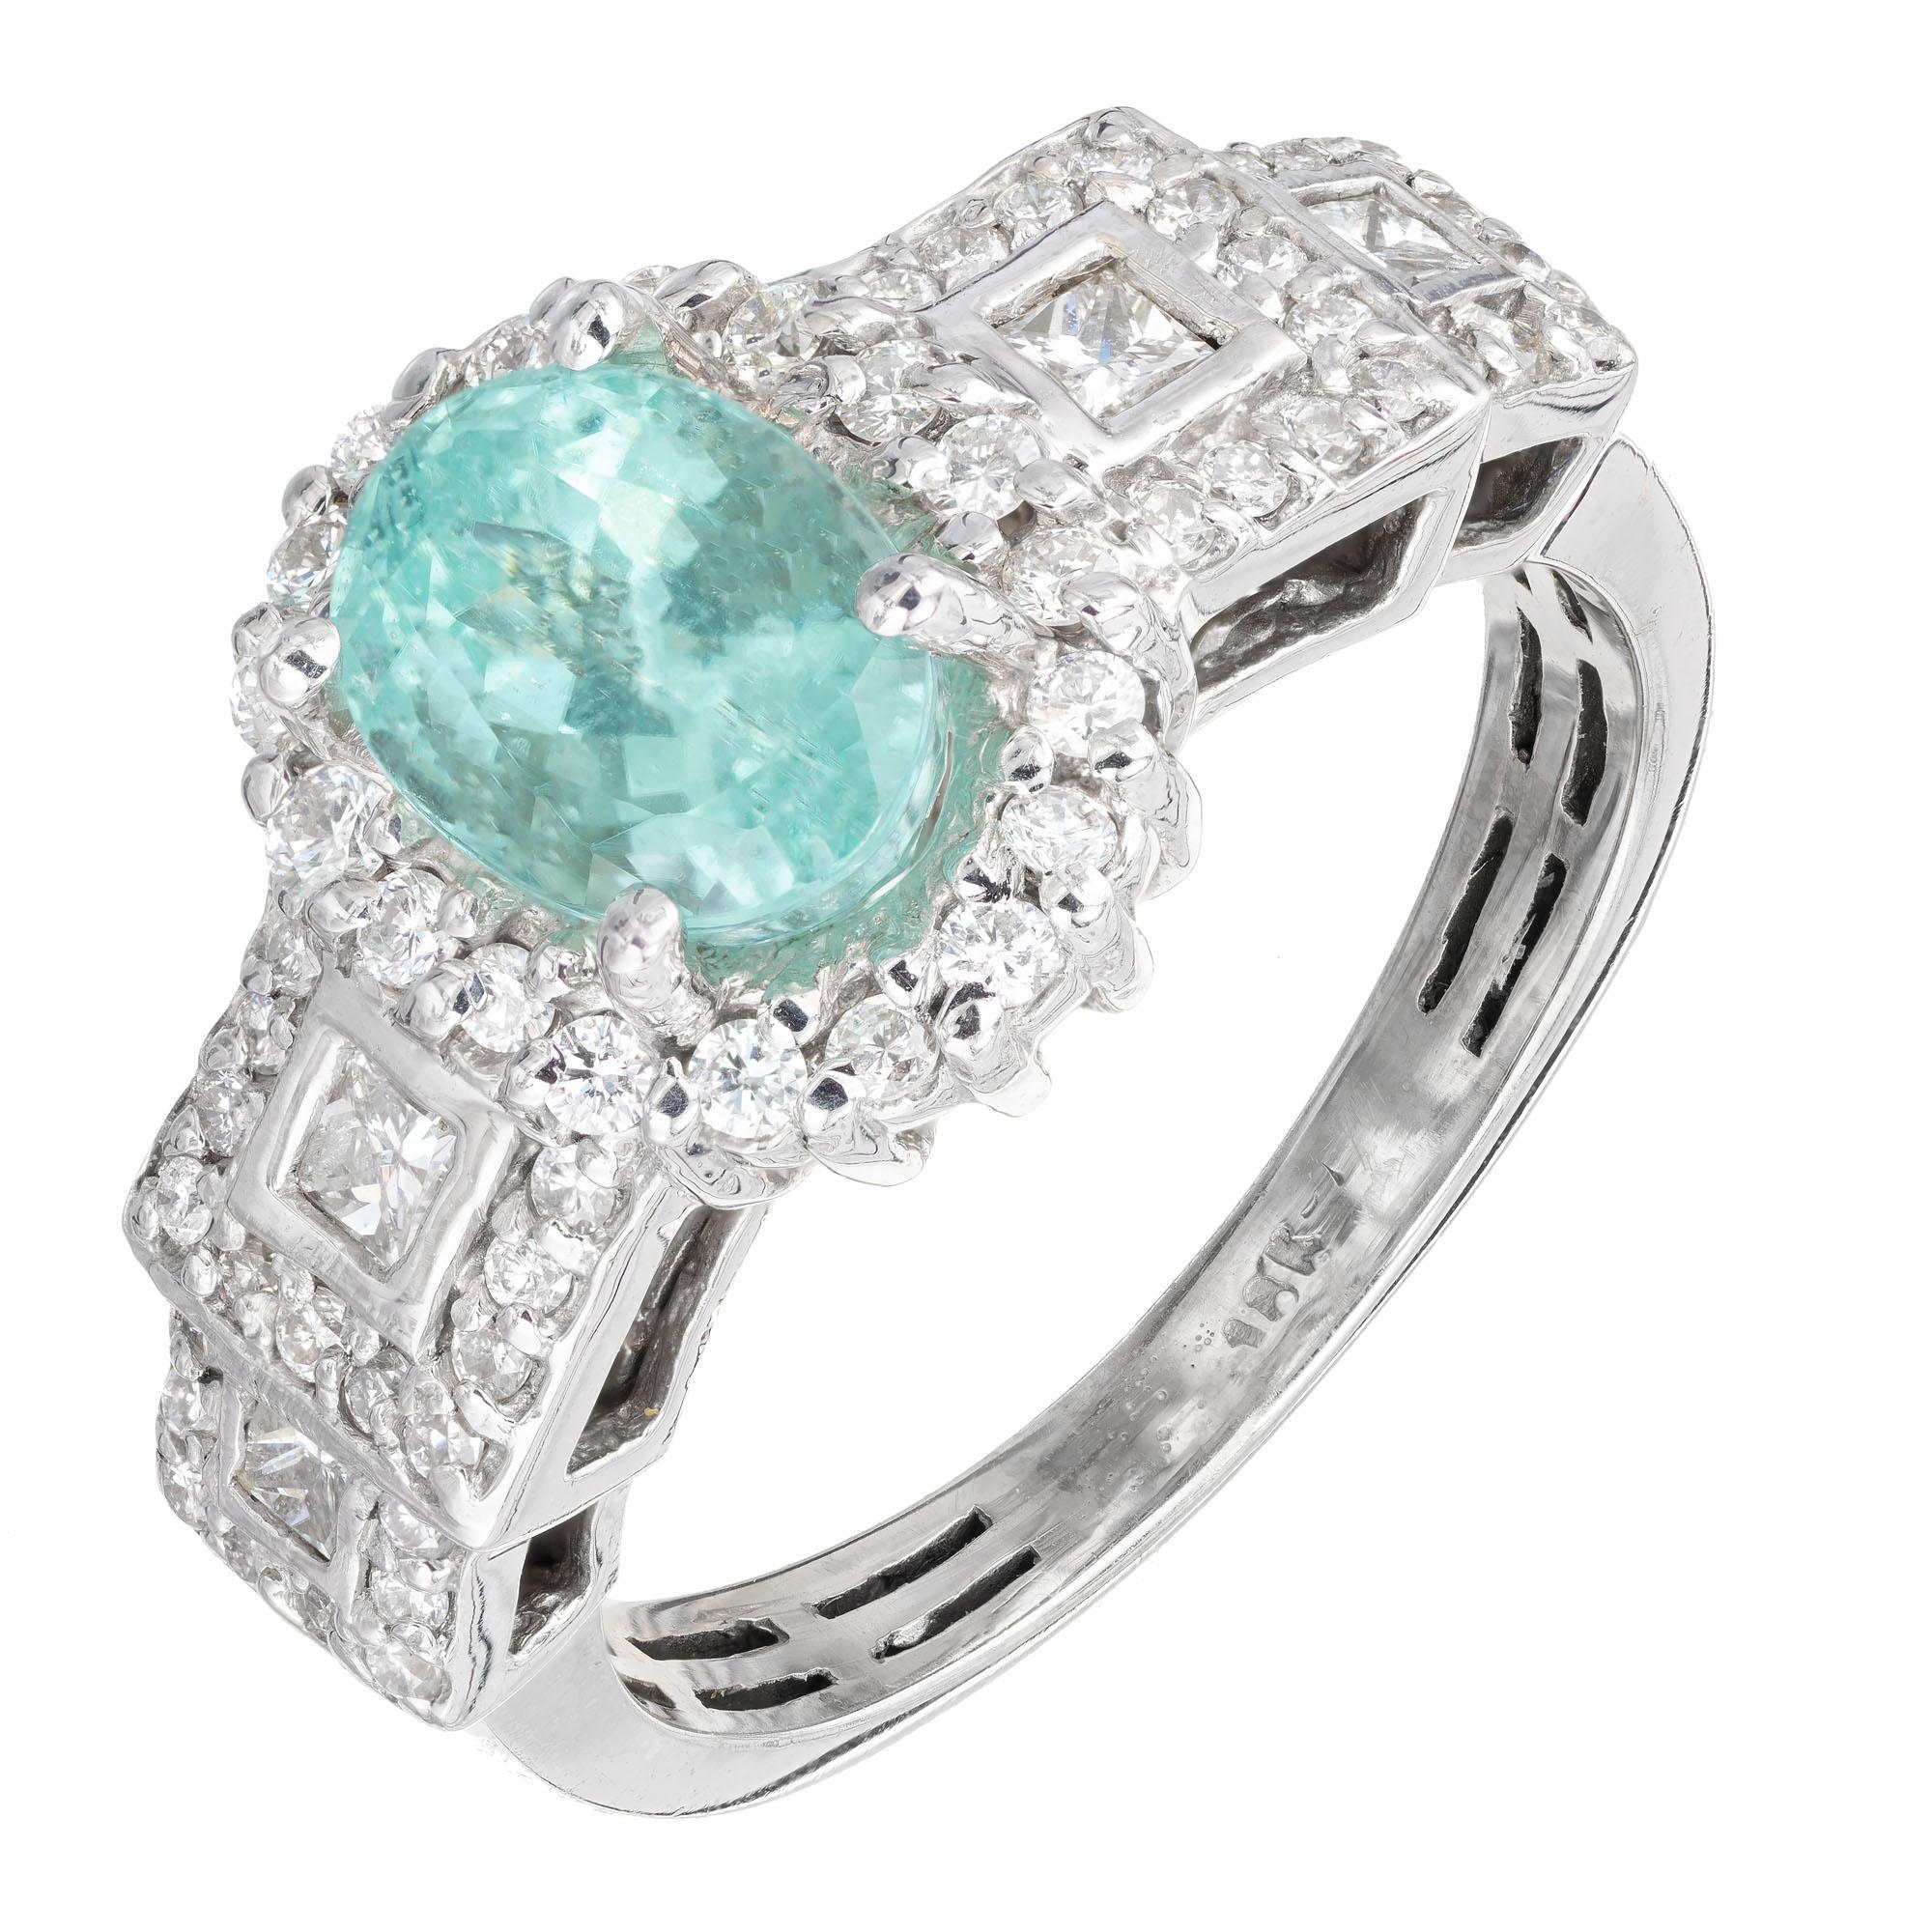 GIA Certified green blue Paraiba tourmaline and diamond engagement ring. Oval tourmaline center stone accented with round and princess cut diamonds, set in an 18k white gold setting. 

1 oval green-blue Paraiba tourmaline I, approx. 1.50ct GIA